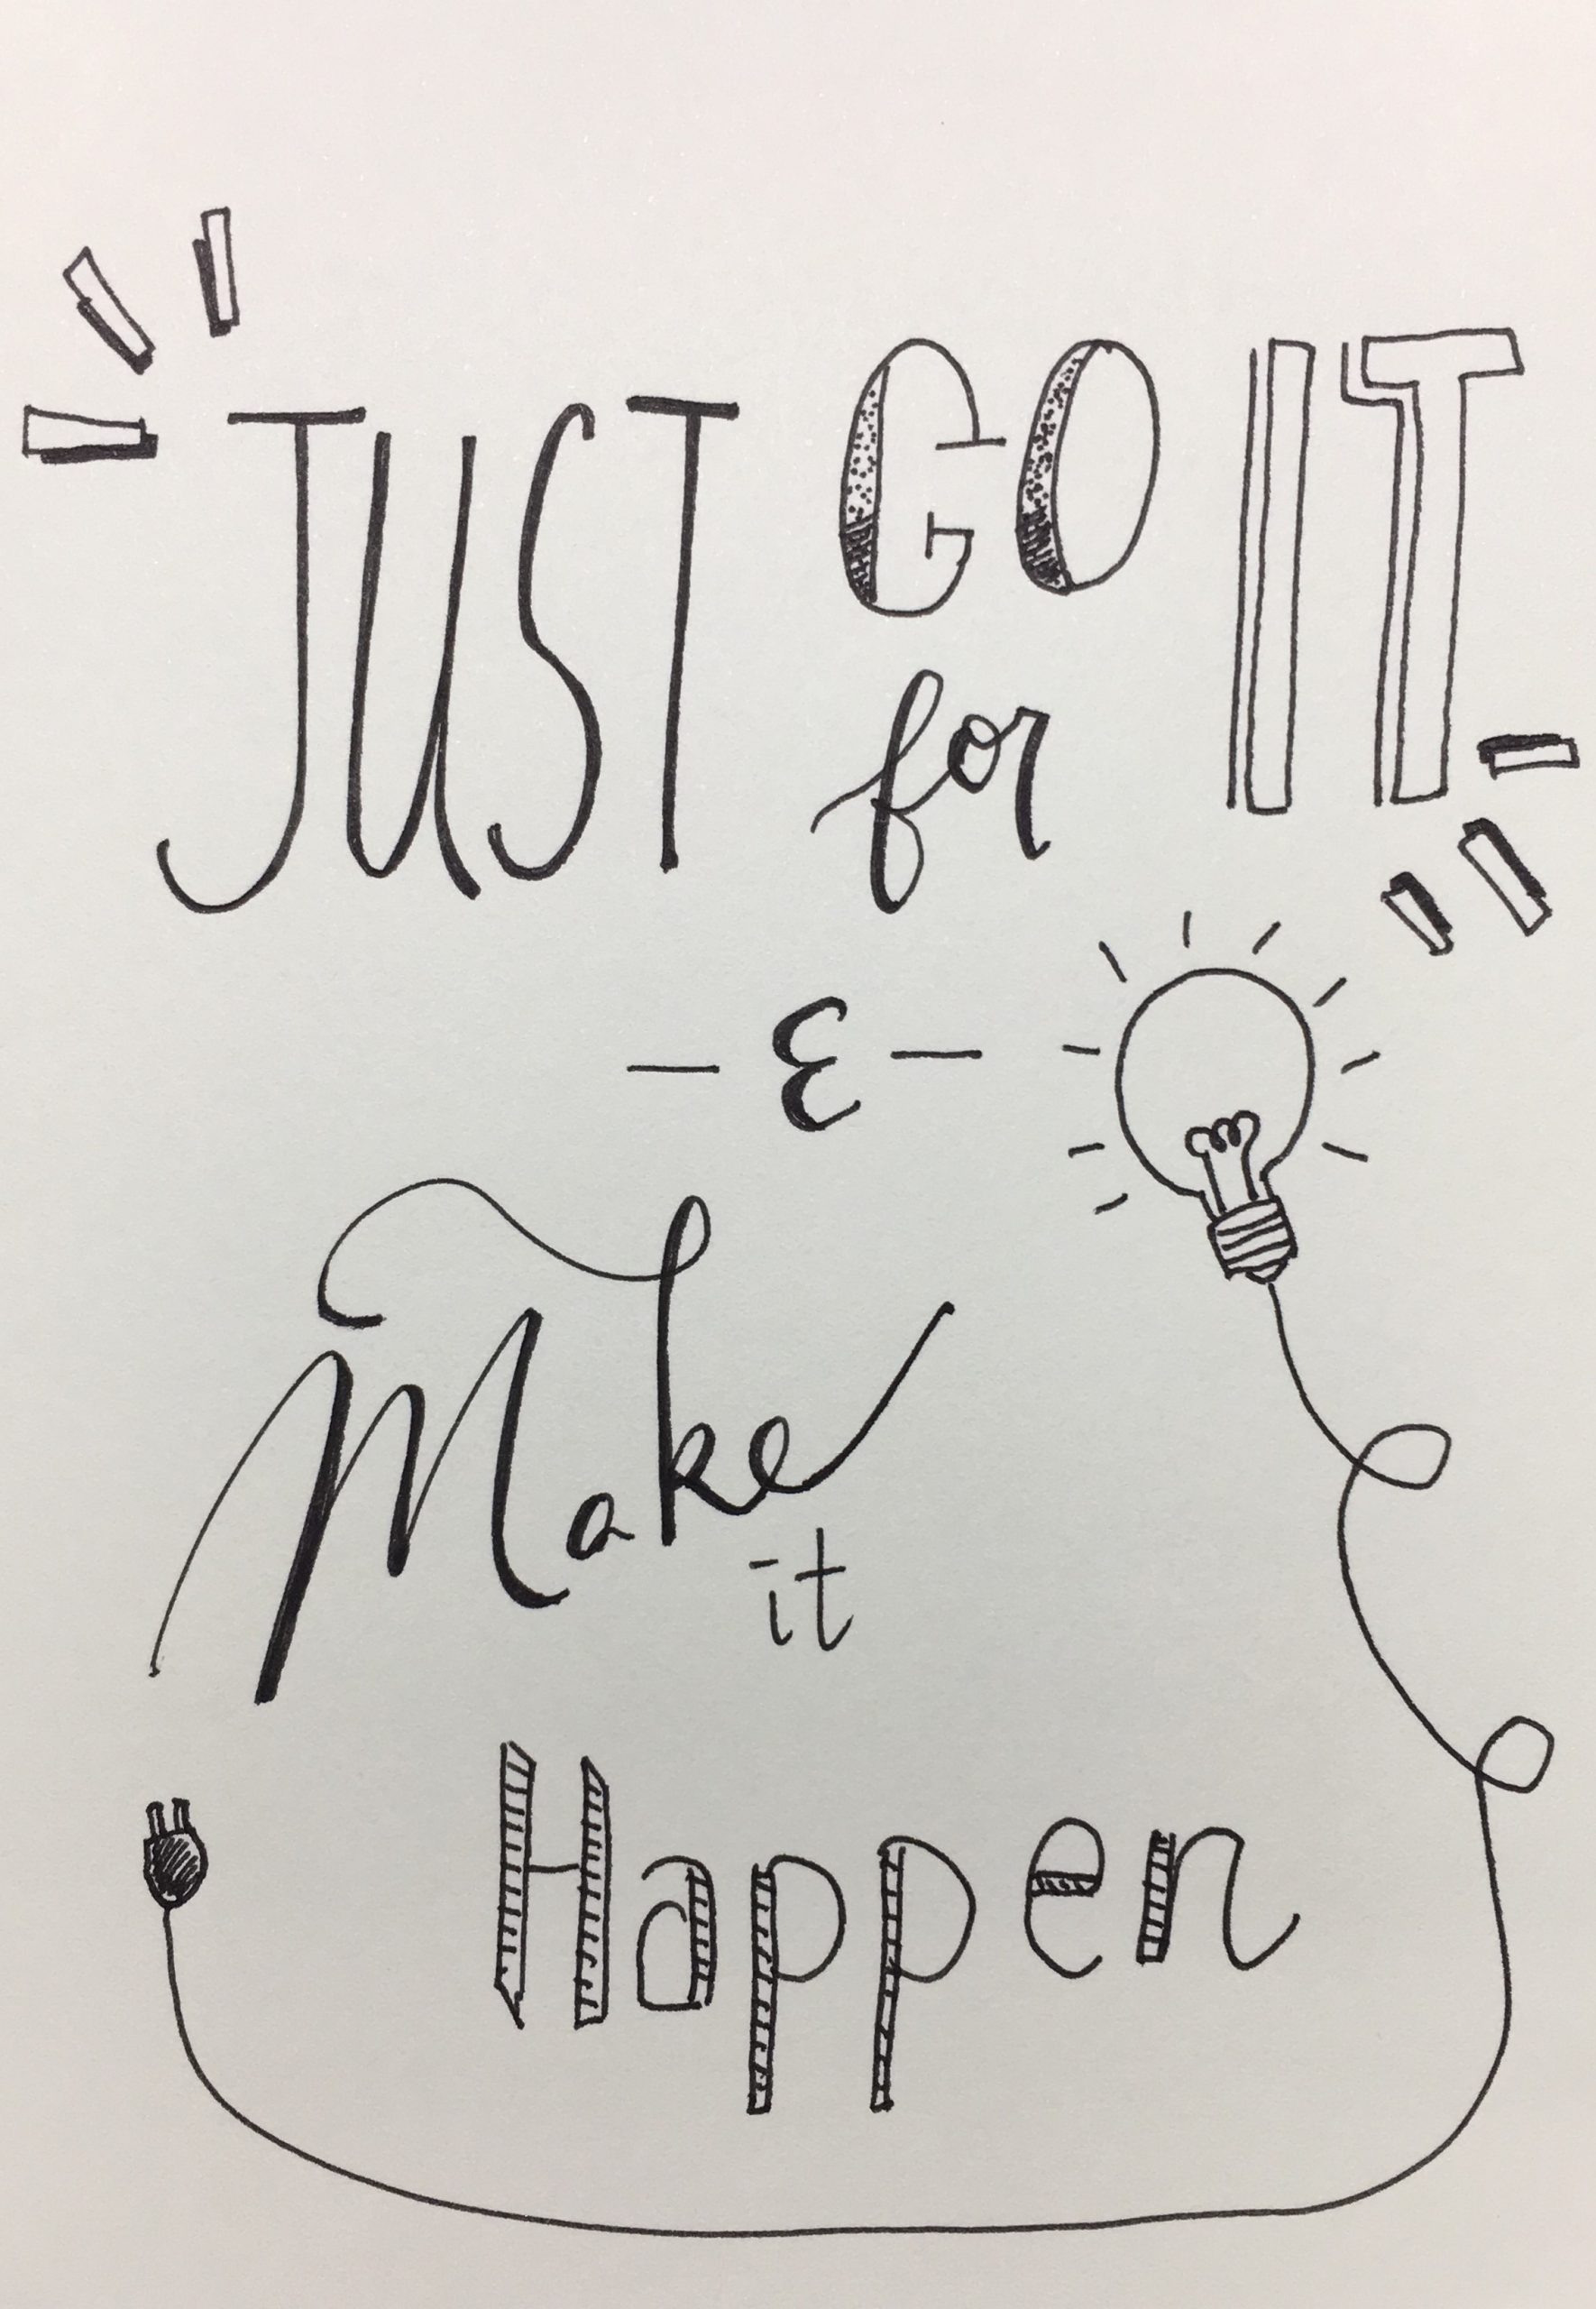 Just Go for it and Make it Happen